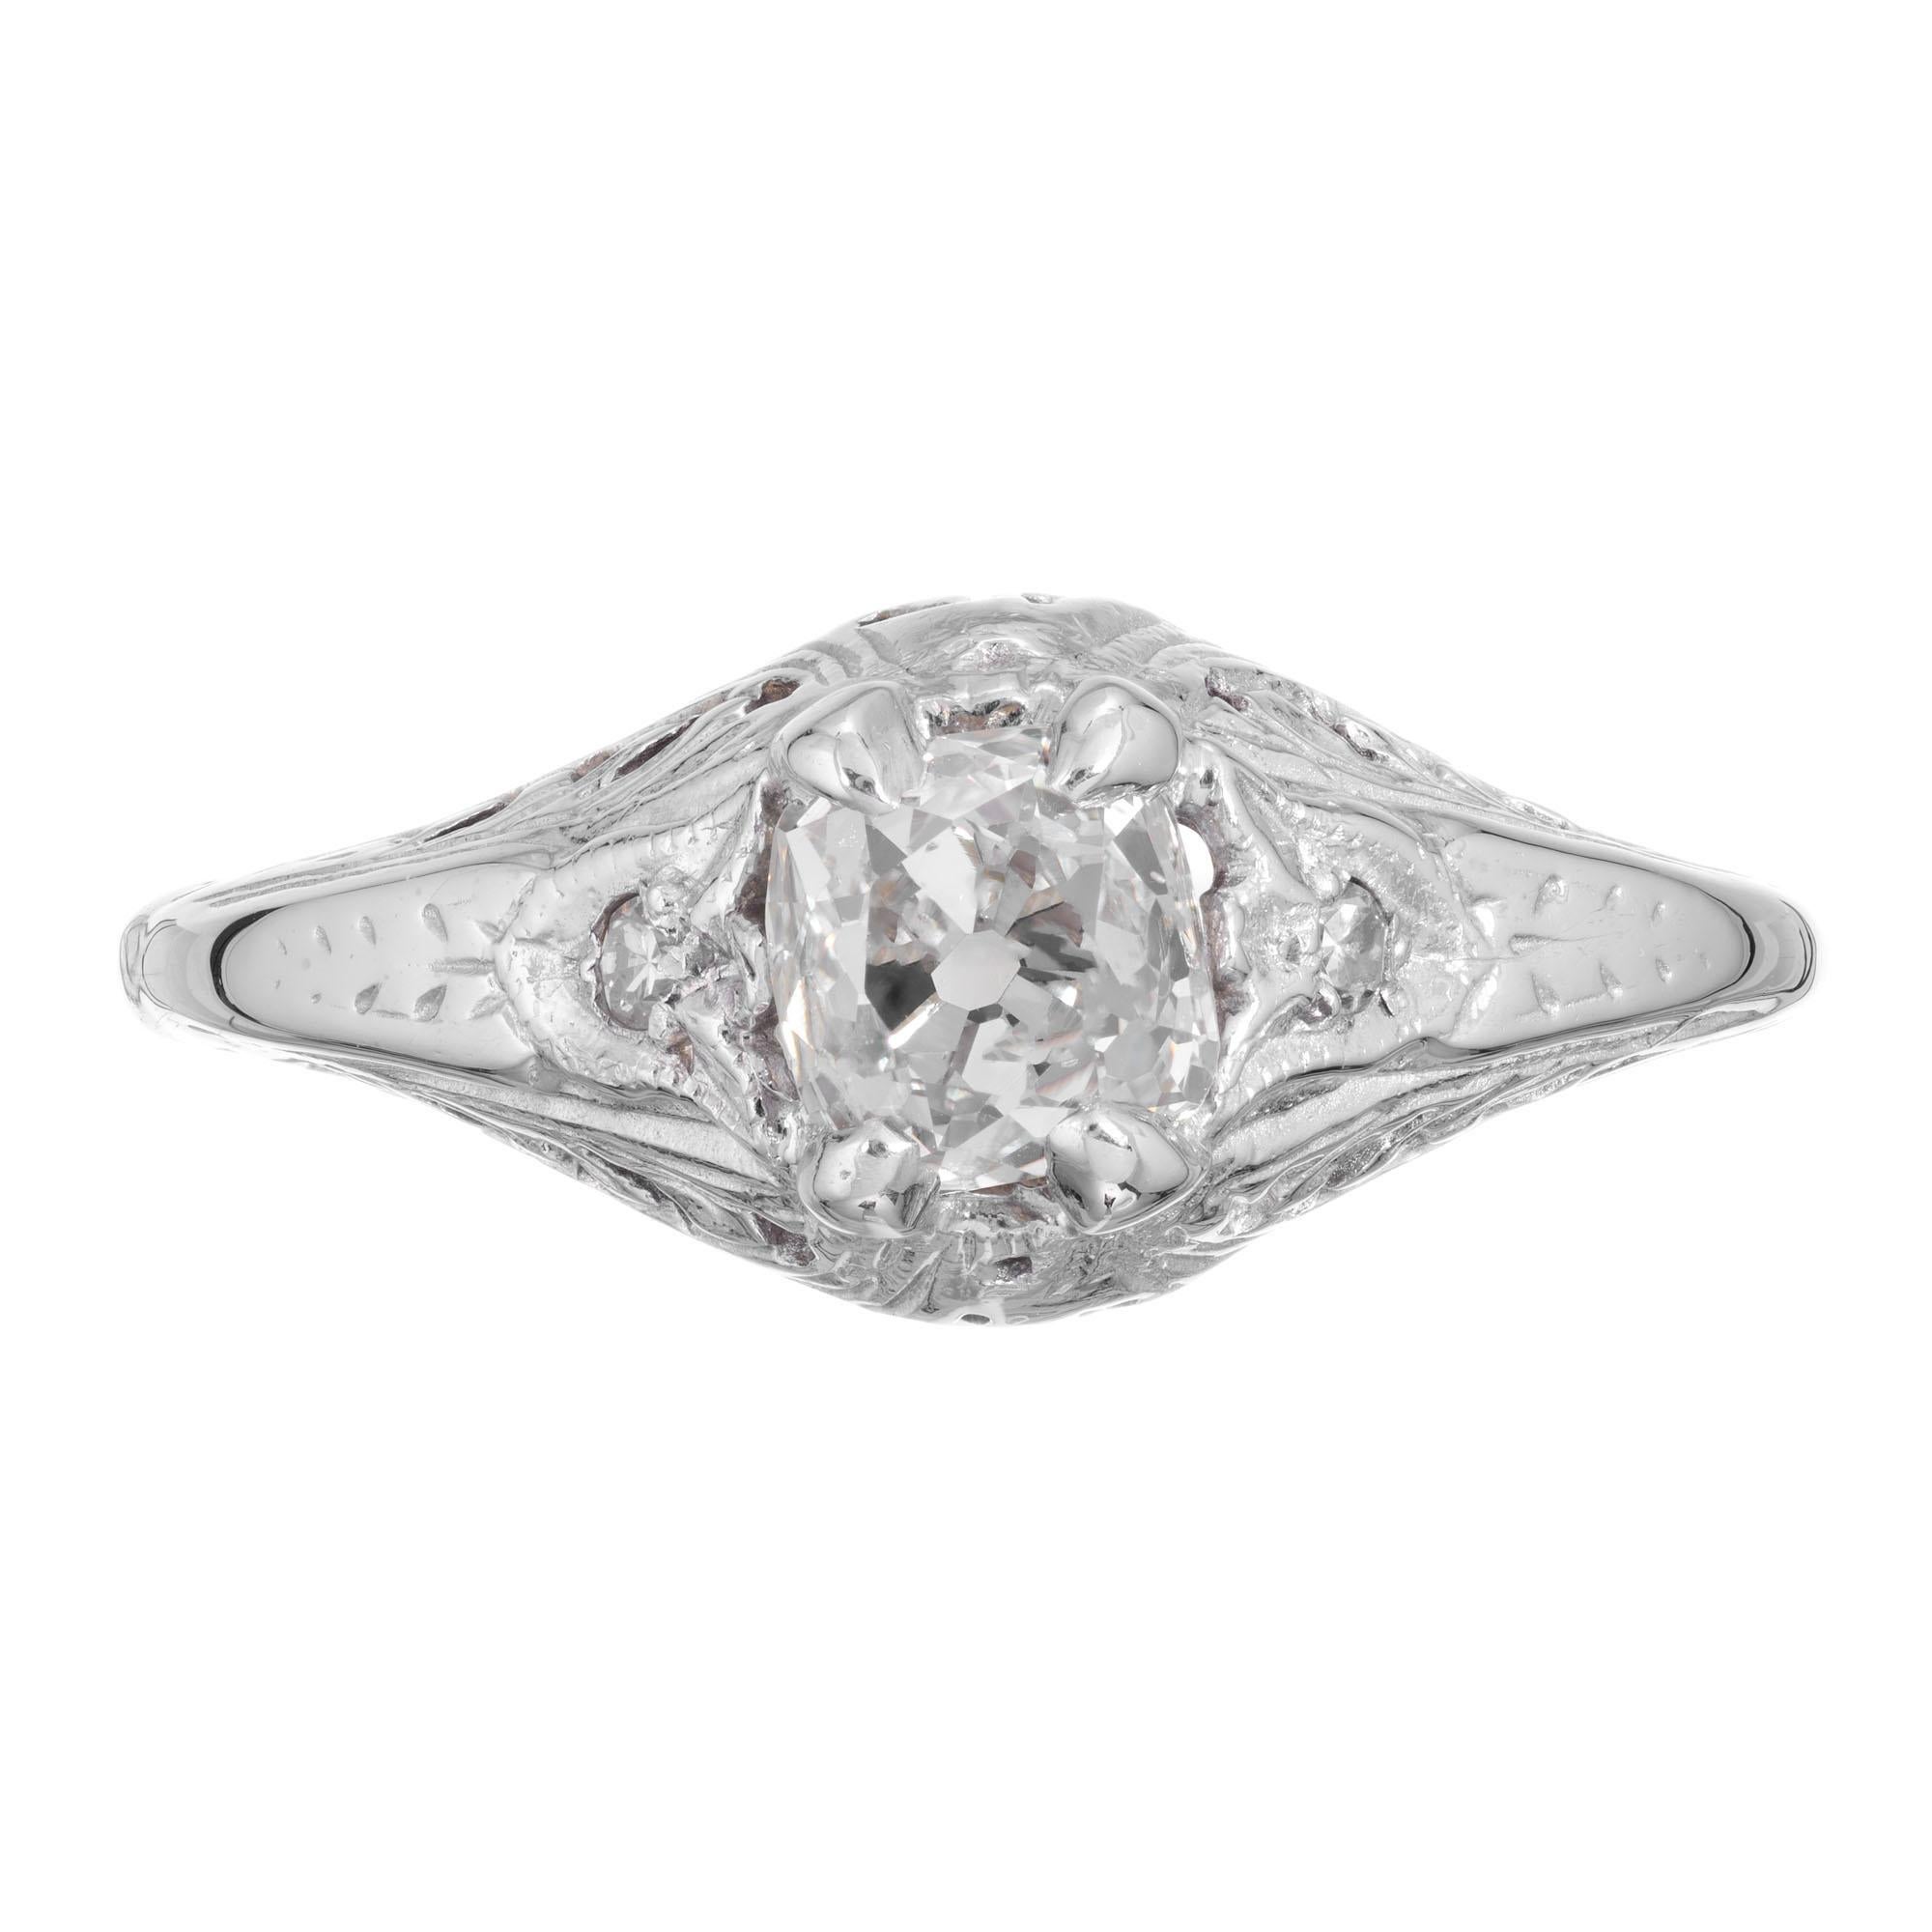 1930’s old mine cut diamond filigree engagement ring. EGL certified center stone with two single cut side diamonds in a 14k white gold setting. 

1 old mine cut diamond I-J SI2, approx. .55ct EGL Certificate # US 400136328D
2 single cut diamonds I